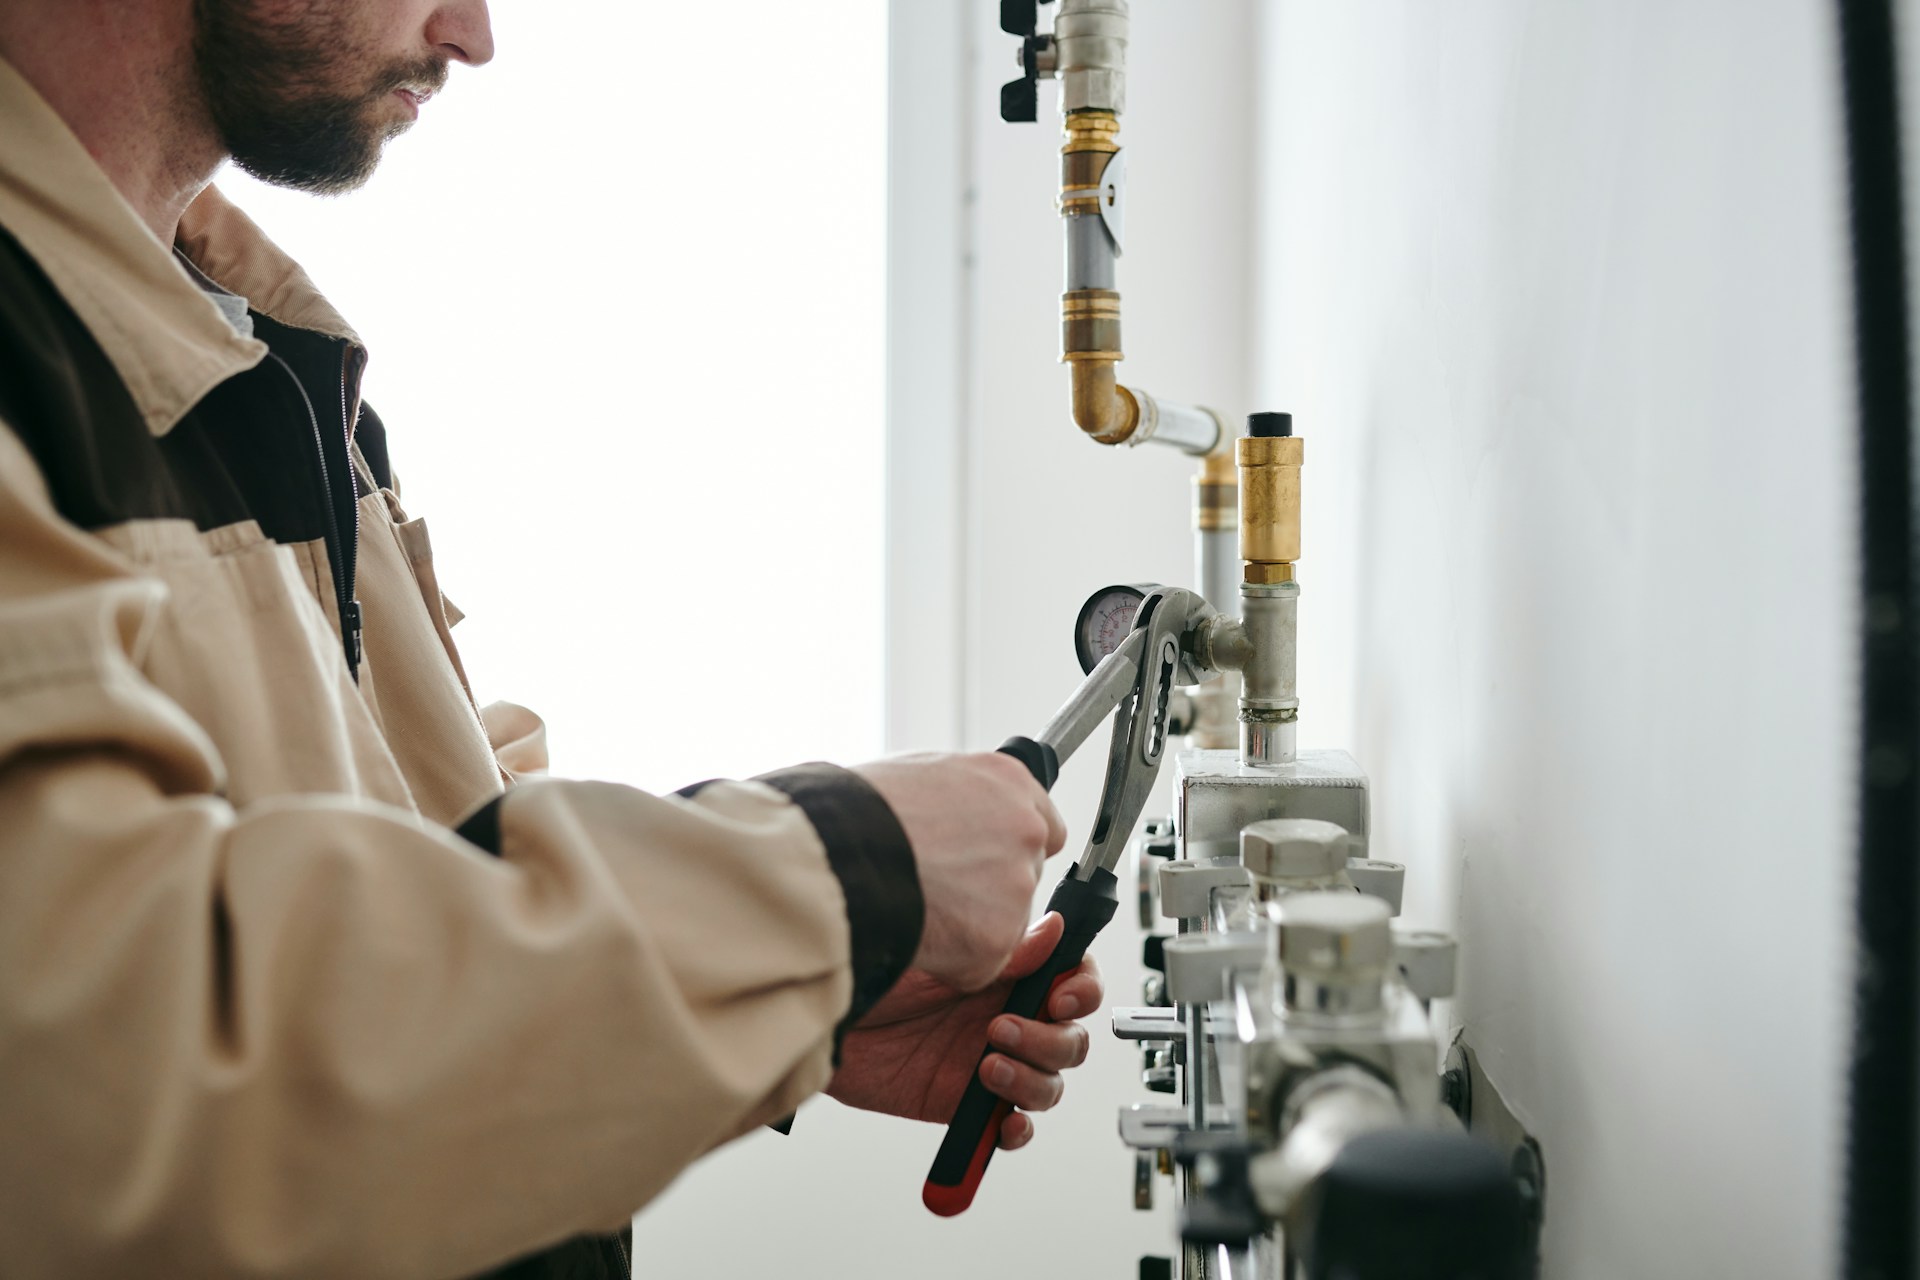 A plumber tightening bolts with a wrench